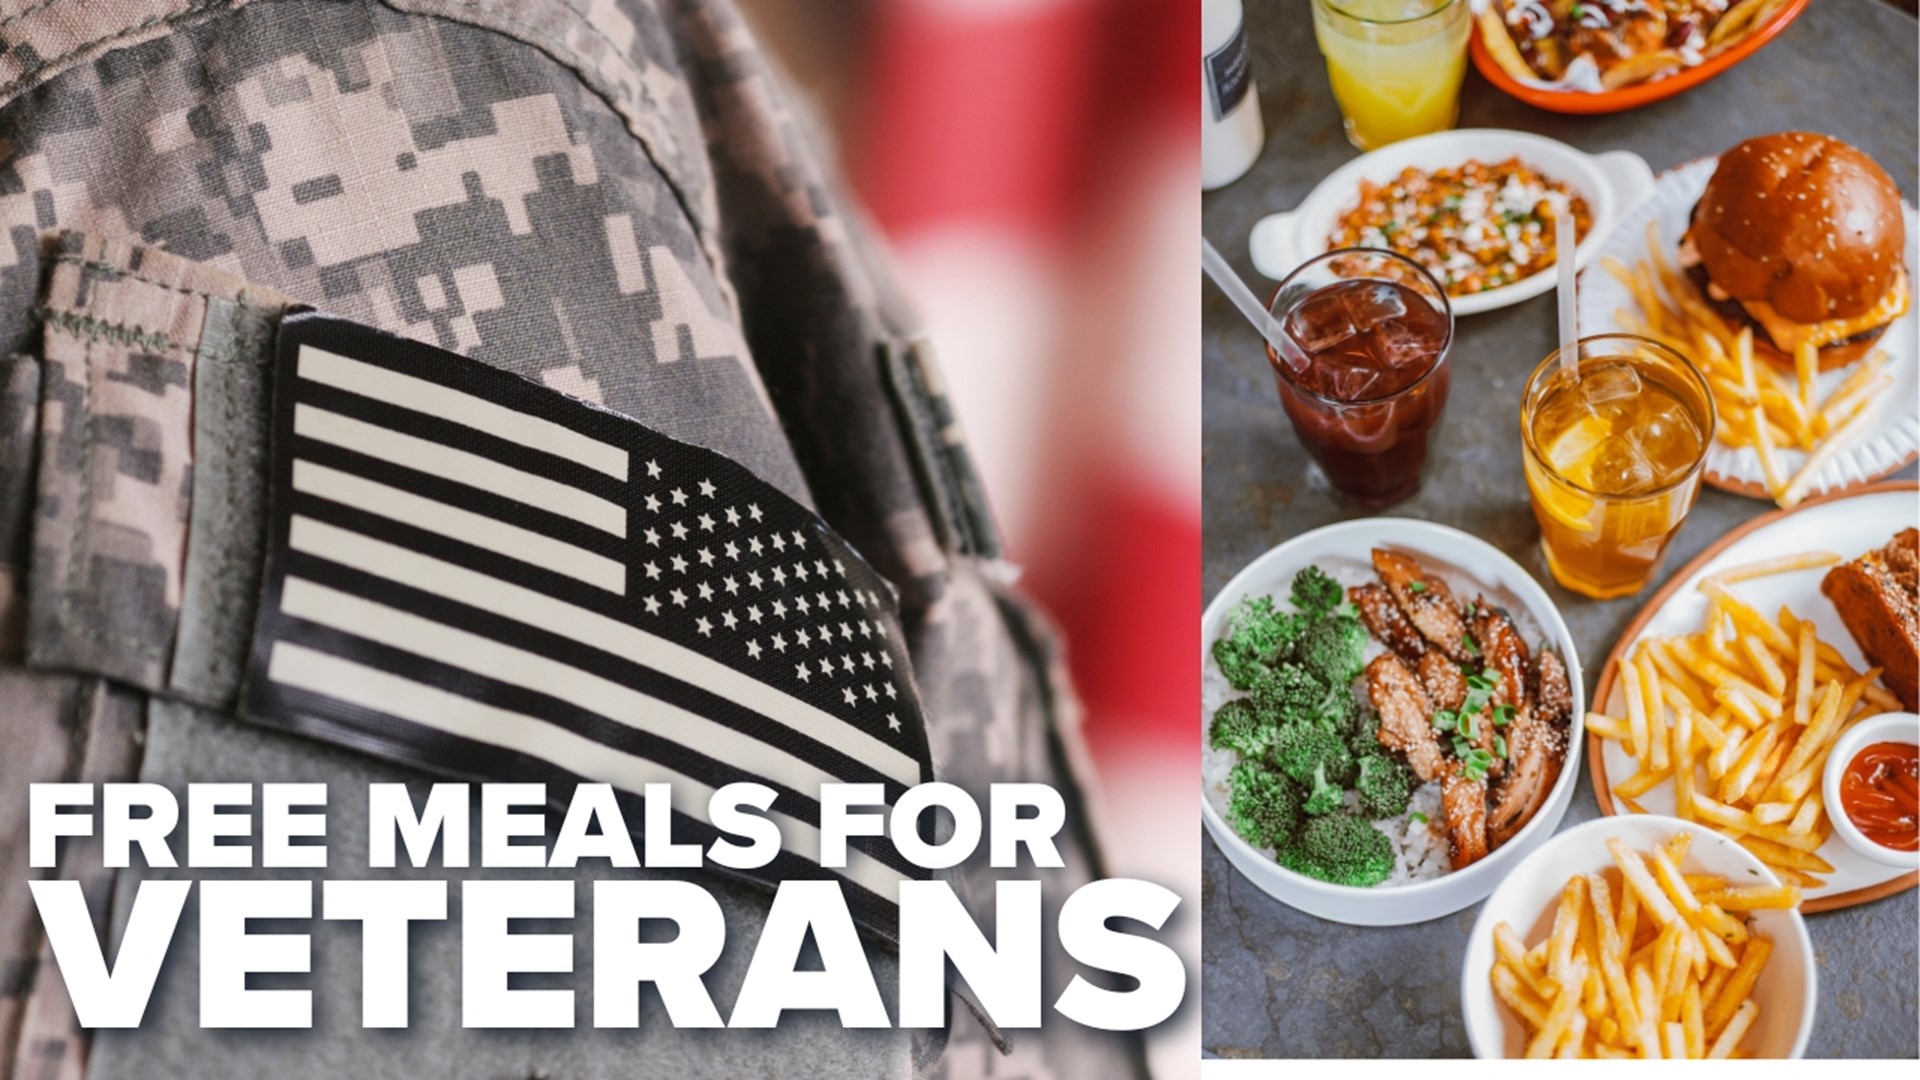 Mac's Hospitality Group is offering free meals for veterans next week.